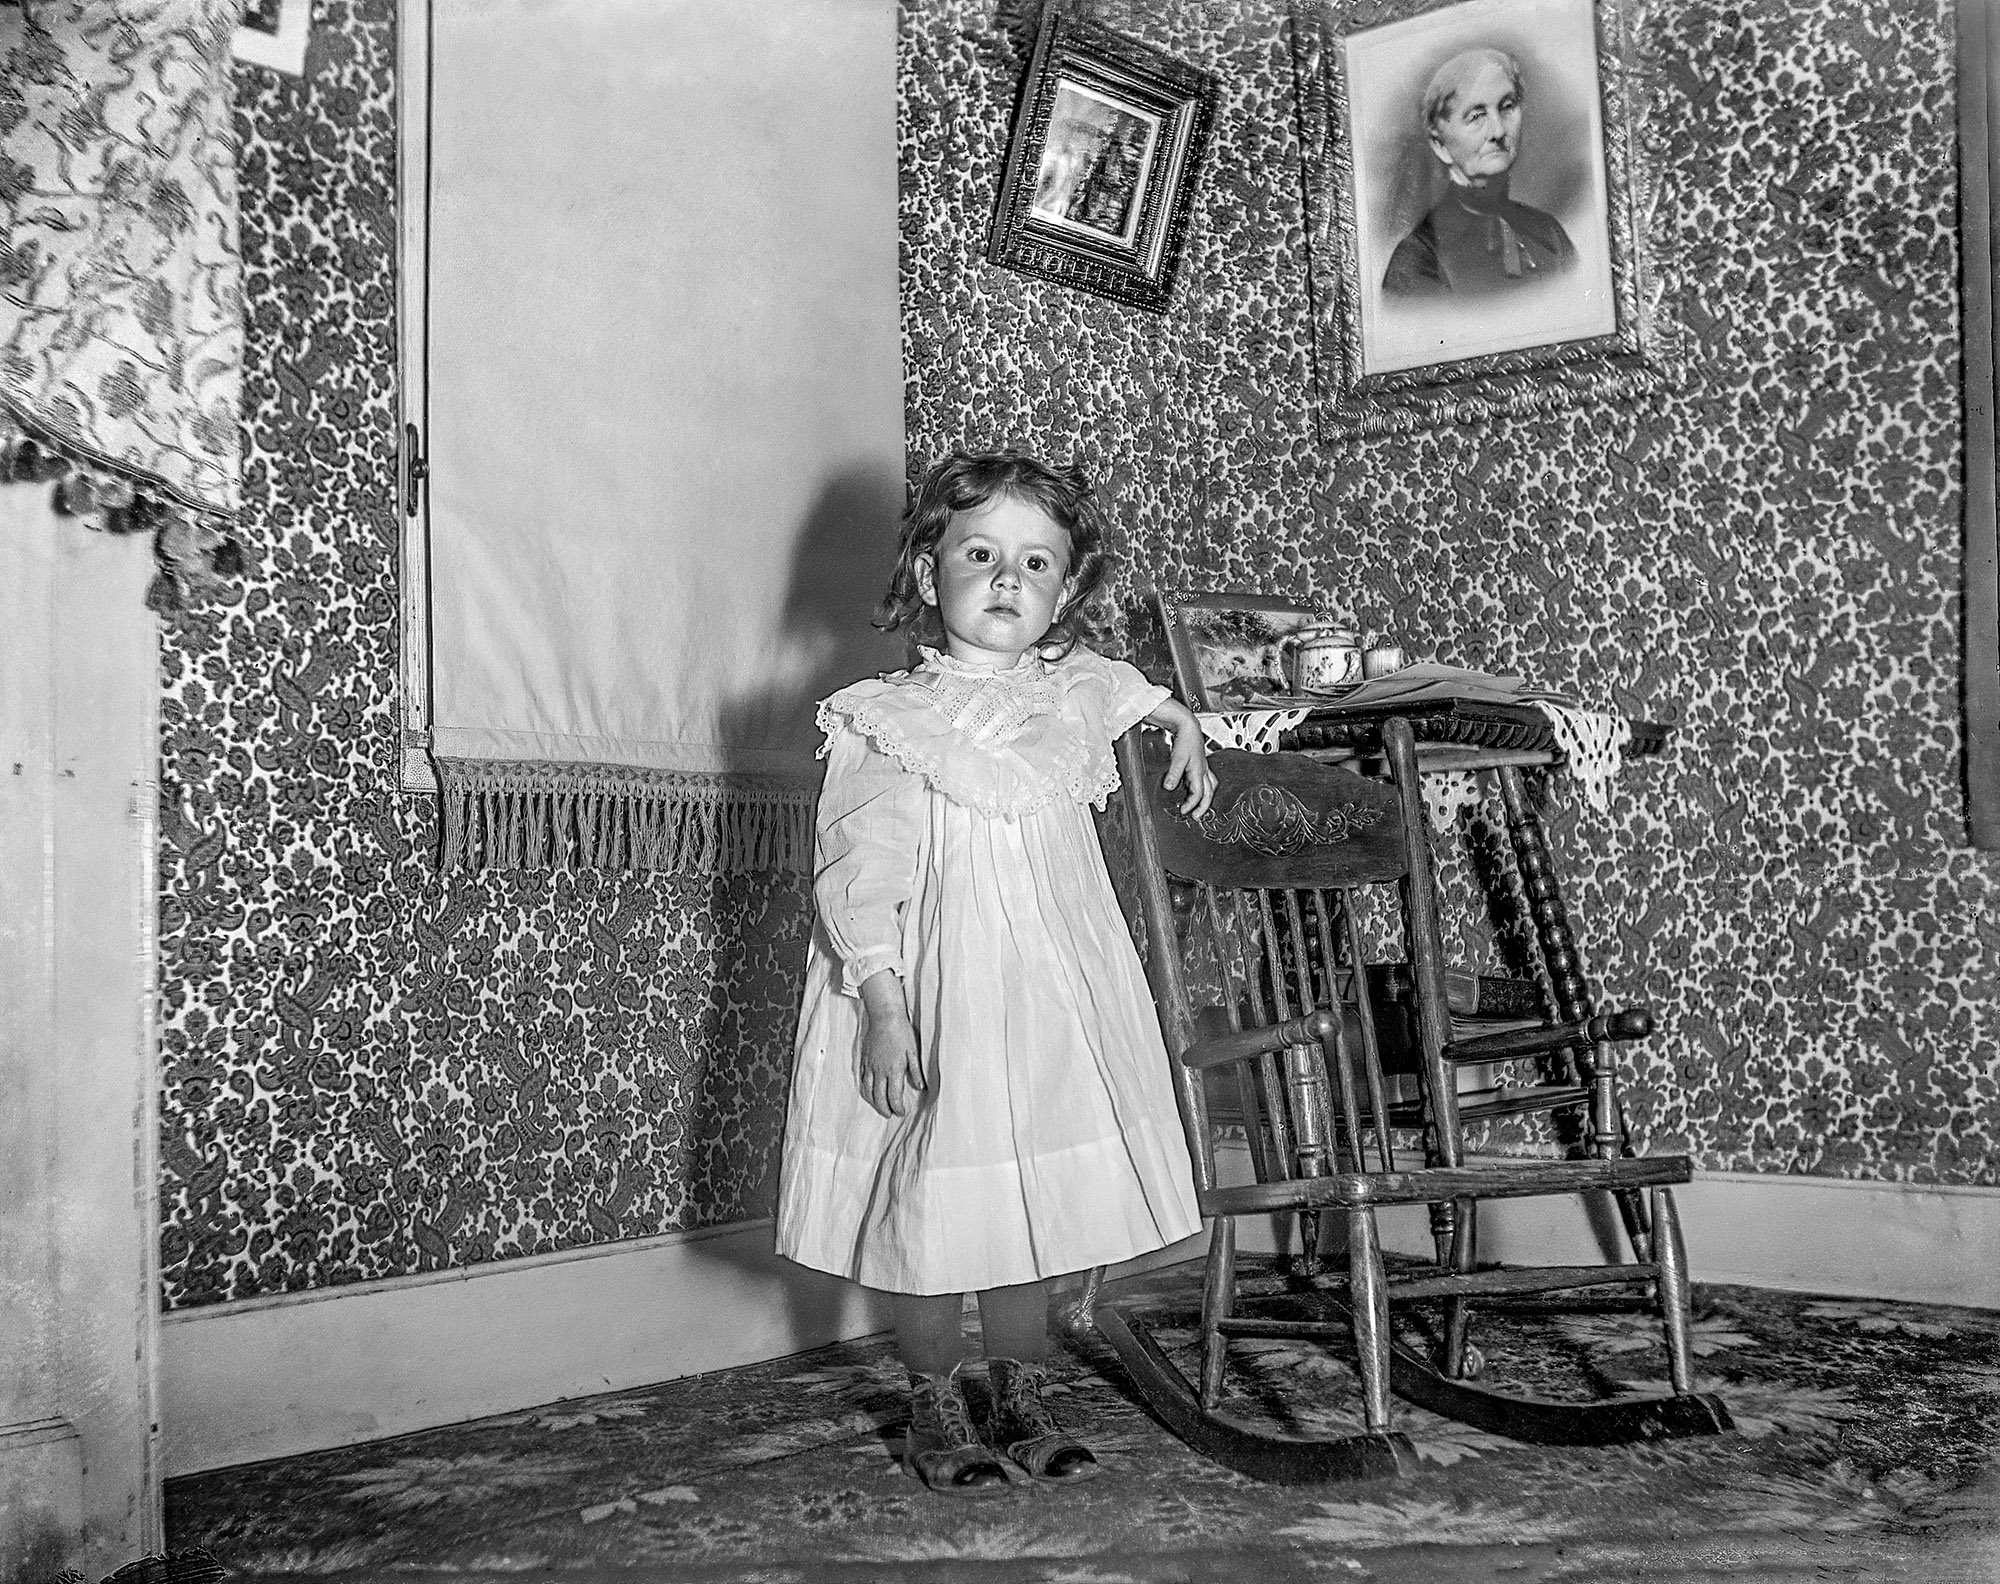 "Marion standing by rocker in parlor" is what's written on the envelope I found this glass negative in. It's from Glenmont, New York, circa 1910. View full size.